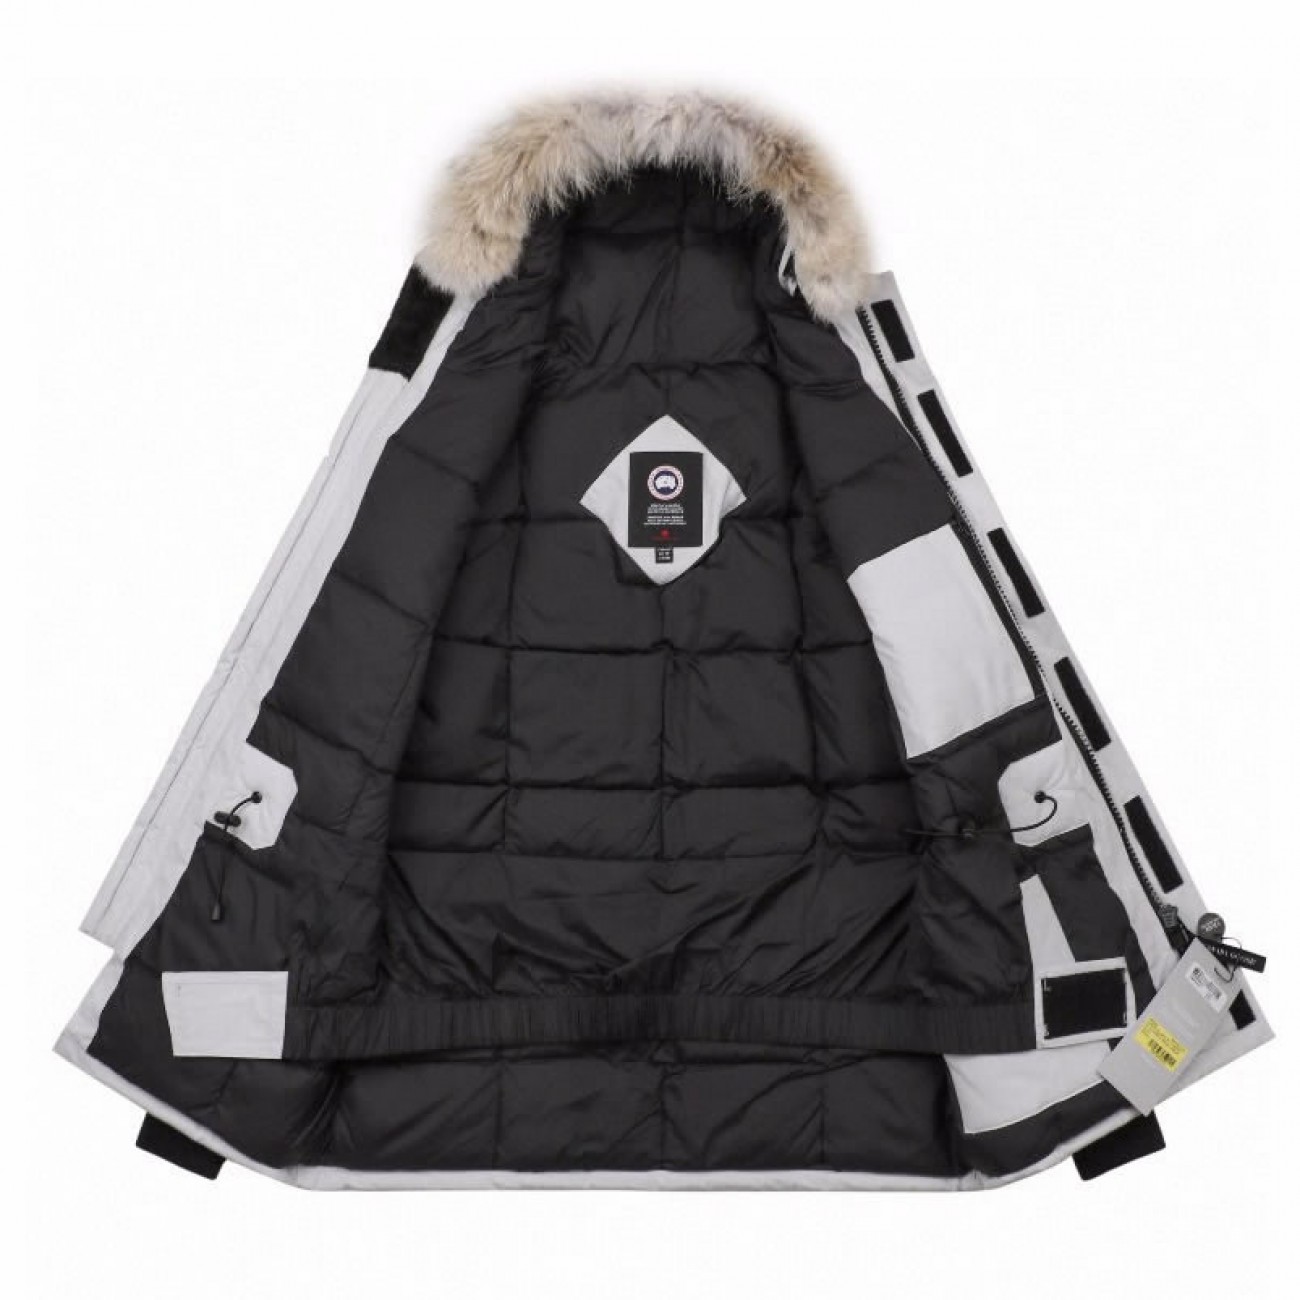 08 ' Canada Goose '19FW Expedition 4660MA Down Jacket Coat "Silver White"